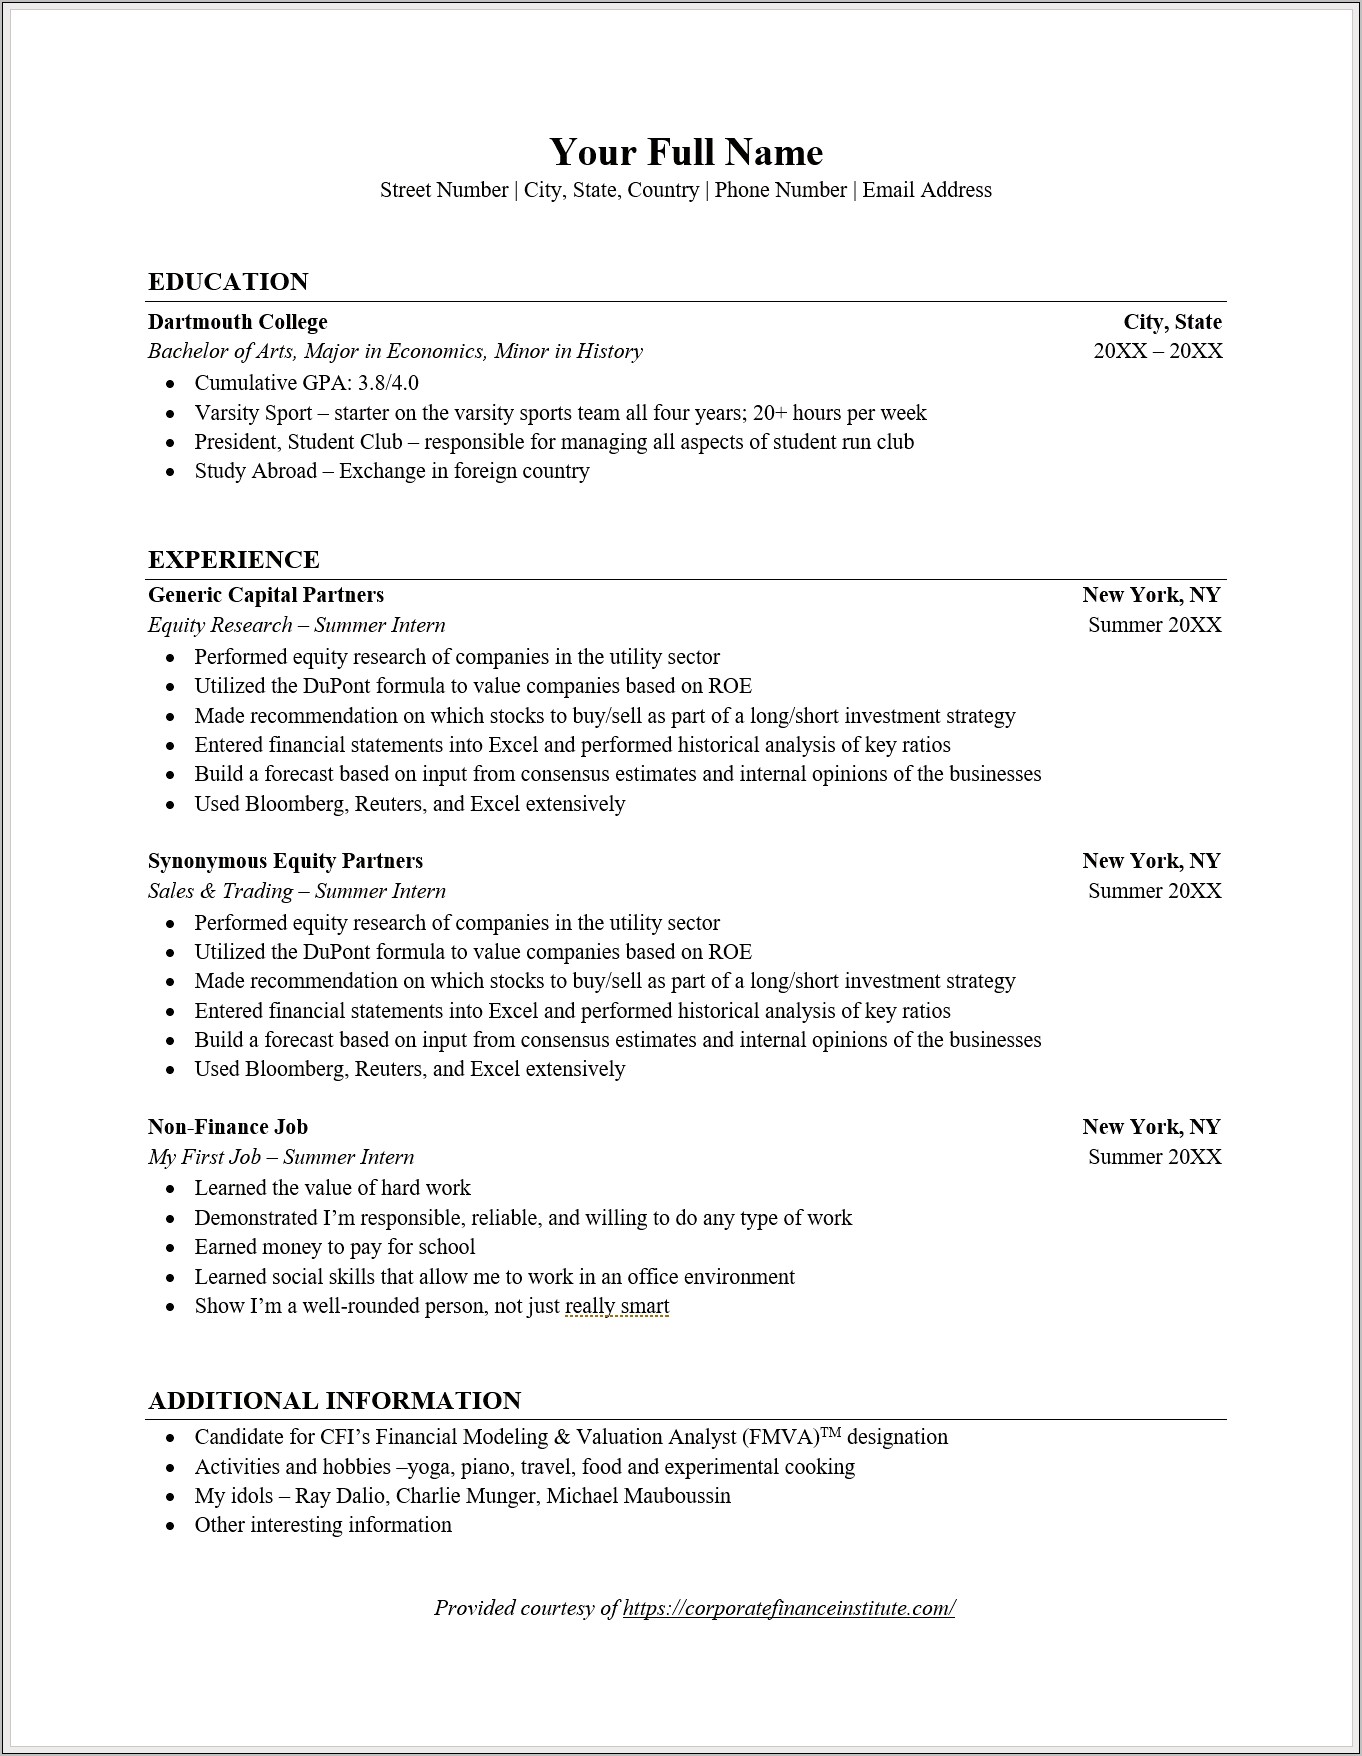 Not Working Or Working On Resume